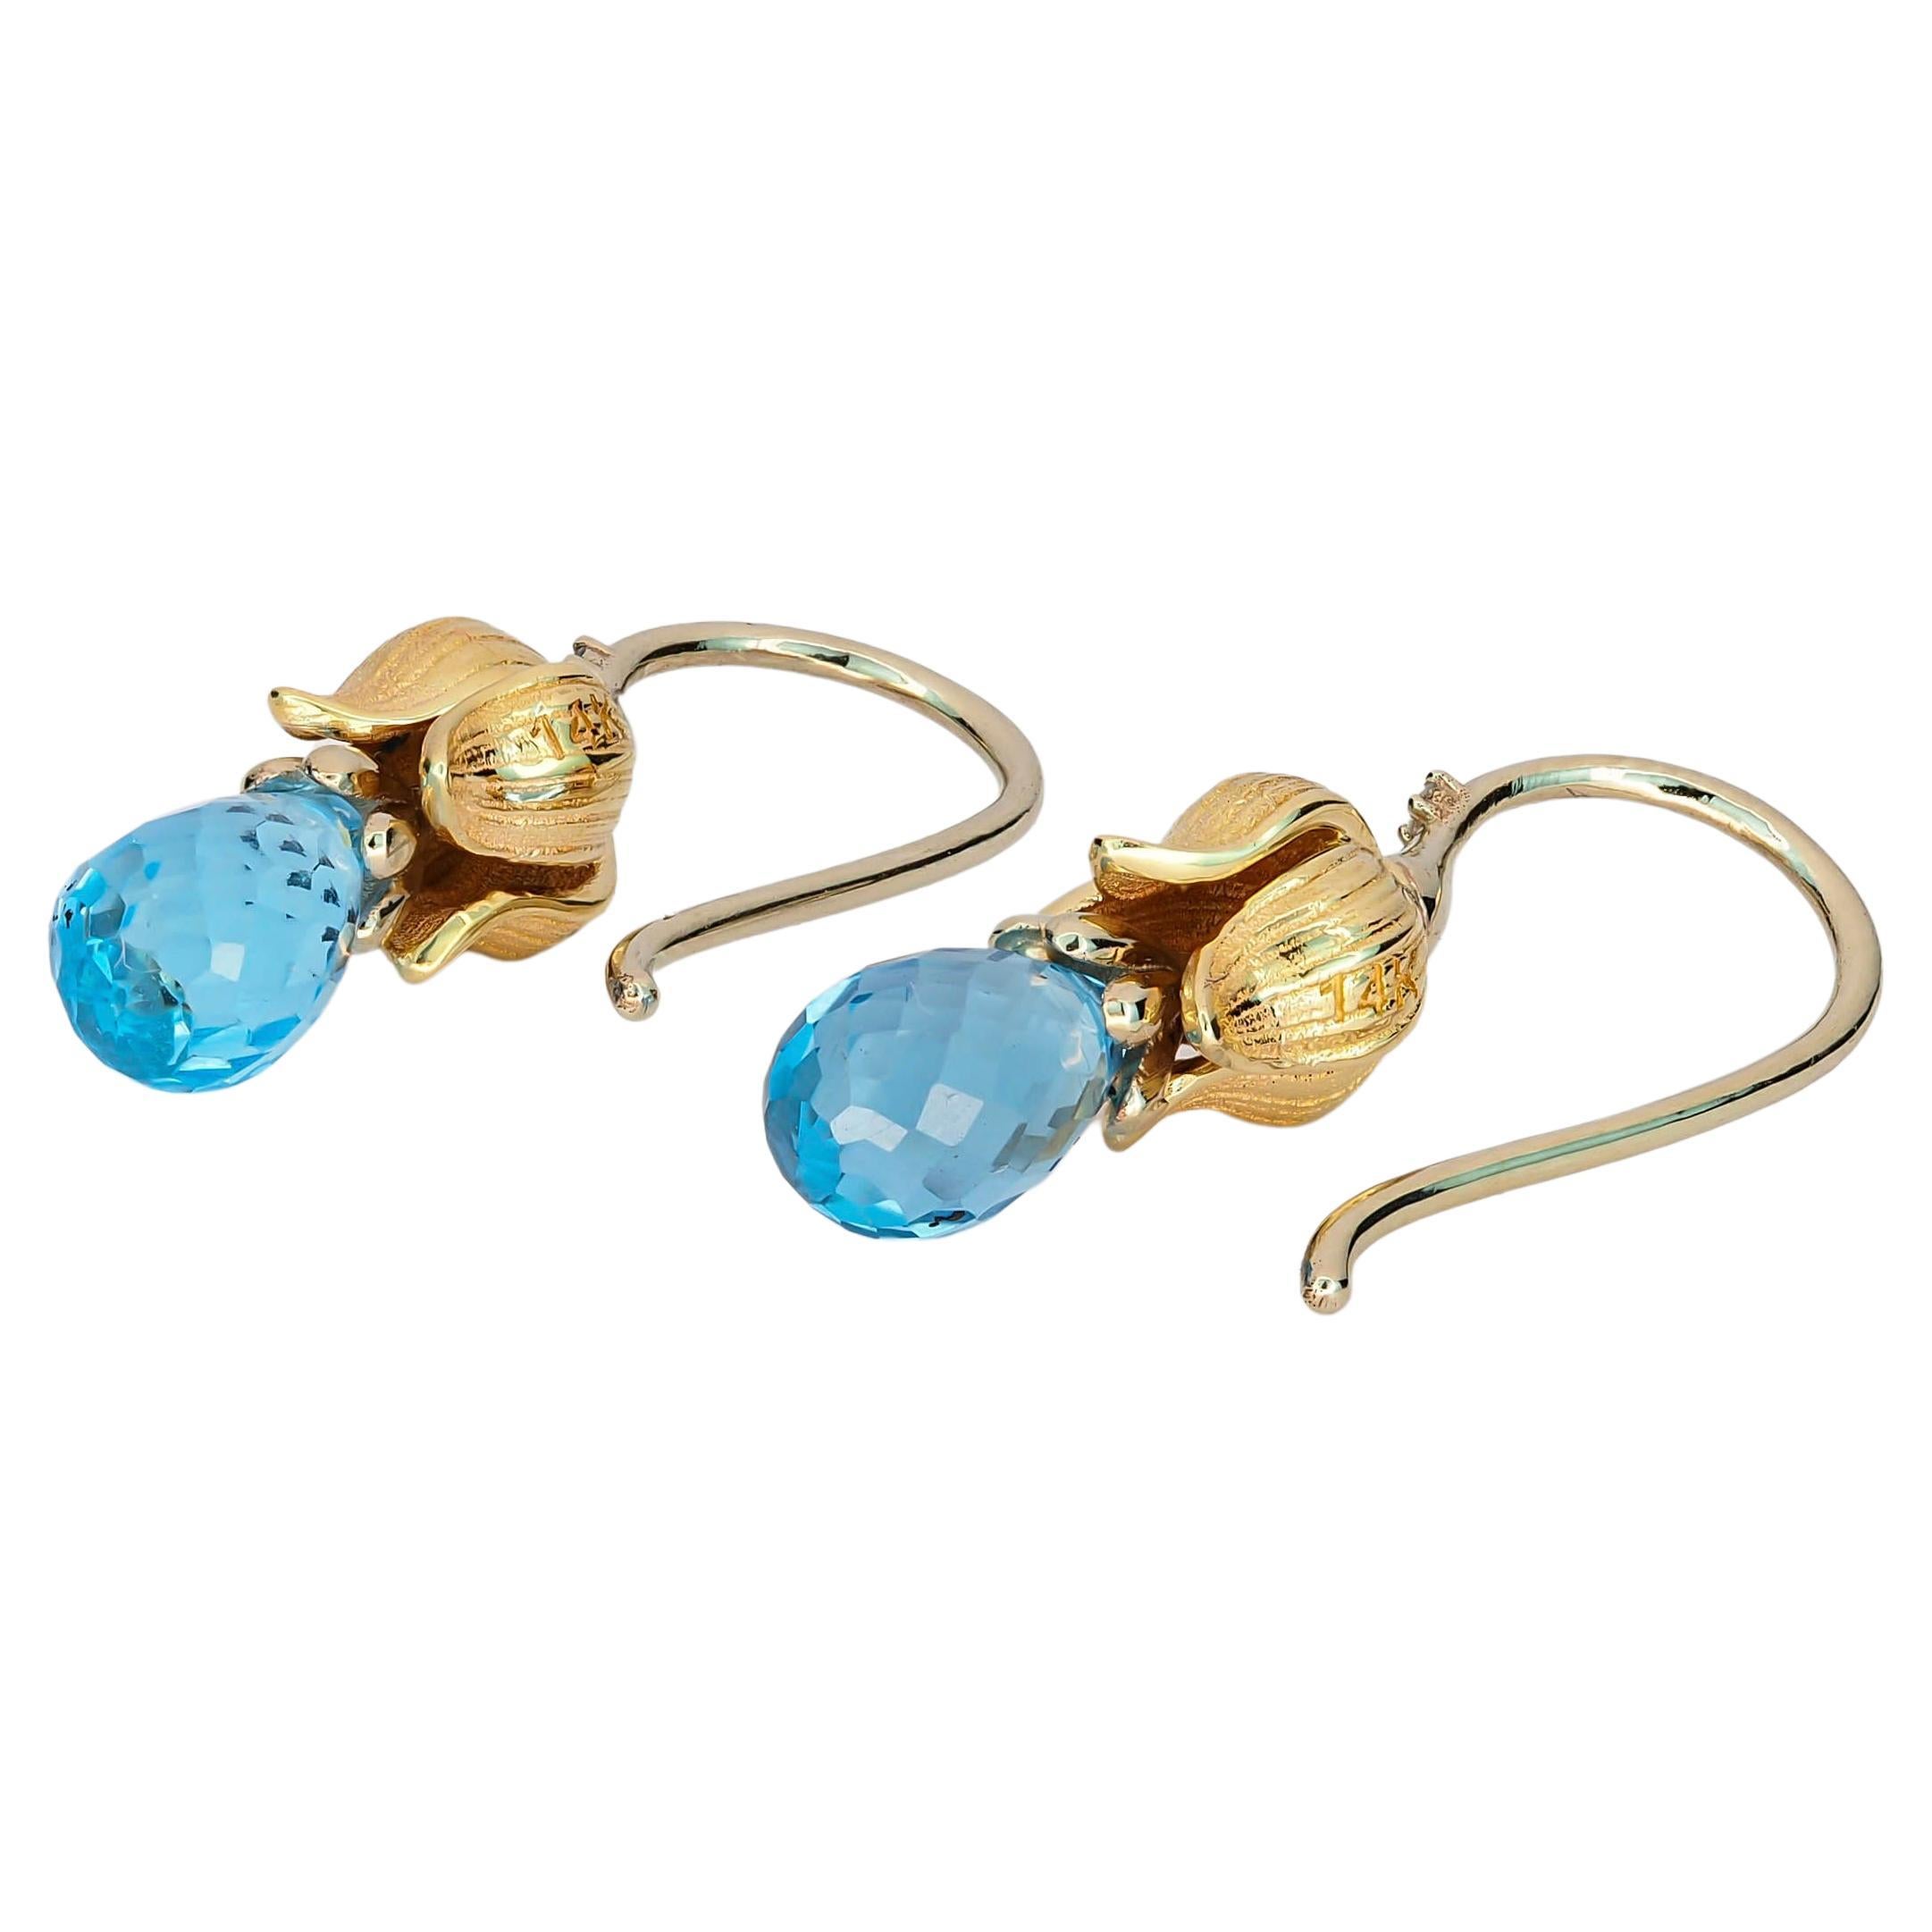 Flower design earrings with natural topaz and diamonds. November birthstone.
Gold color yellow and white - 14k marked
Weight: 3.25 g.
Size: 21 x 6 mm.
Natural topaz: 2 pieces, weight - 1.00 ct approx, sky blue color.
Briolette cut, transparent, 8.5